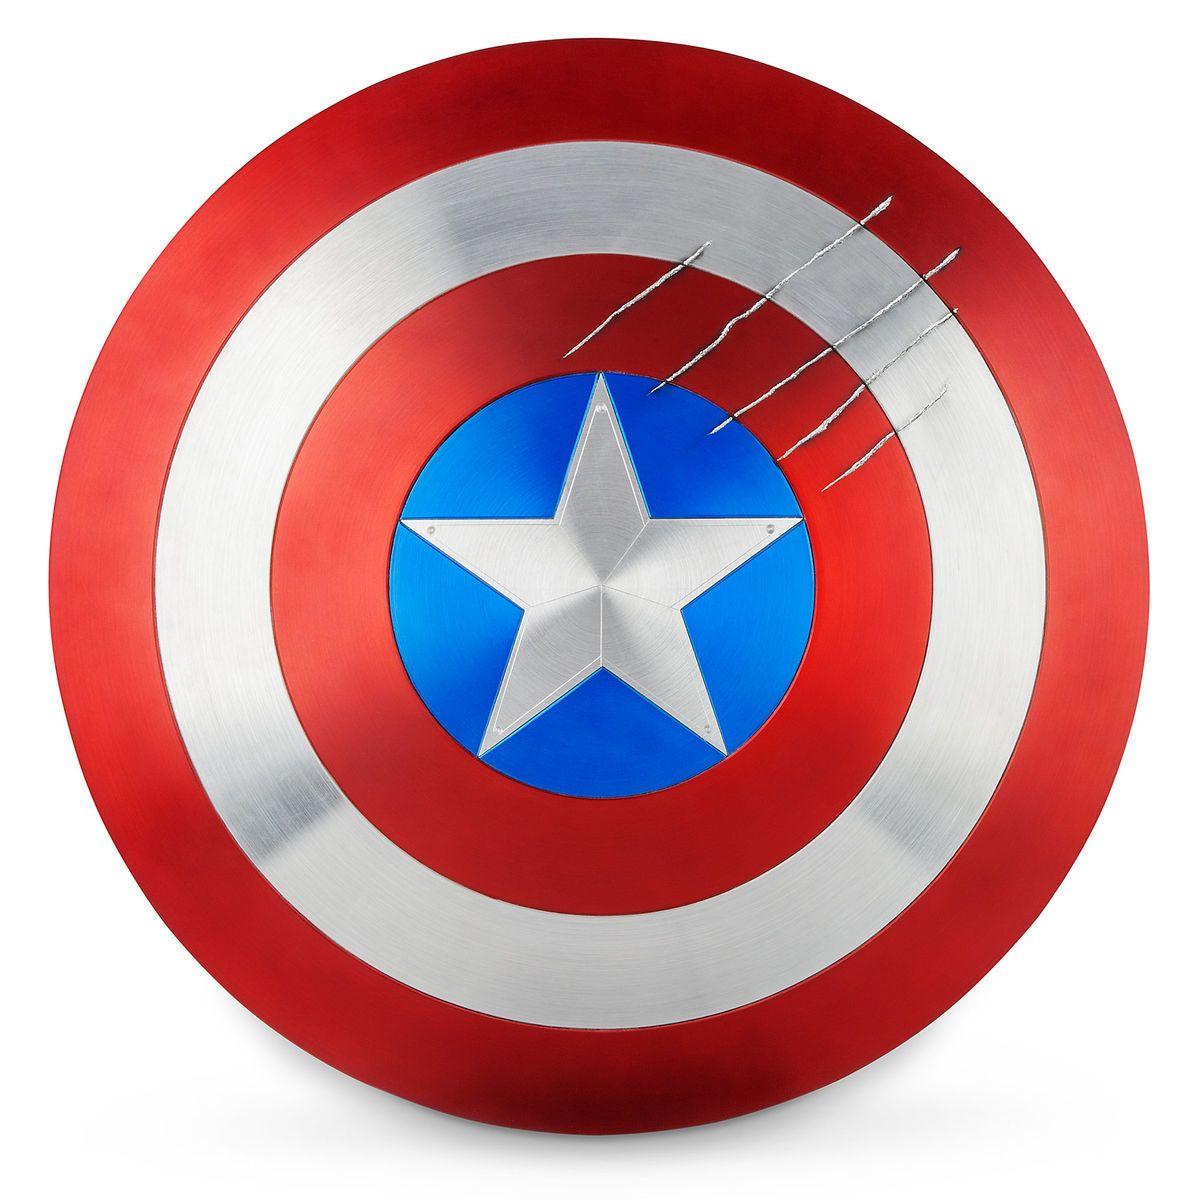 Captain America Logo - Captain America Shield with Black Panther Claw Marks - Marvel ...